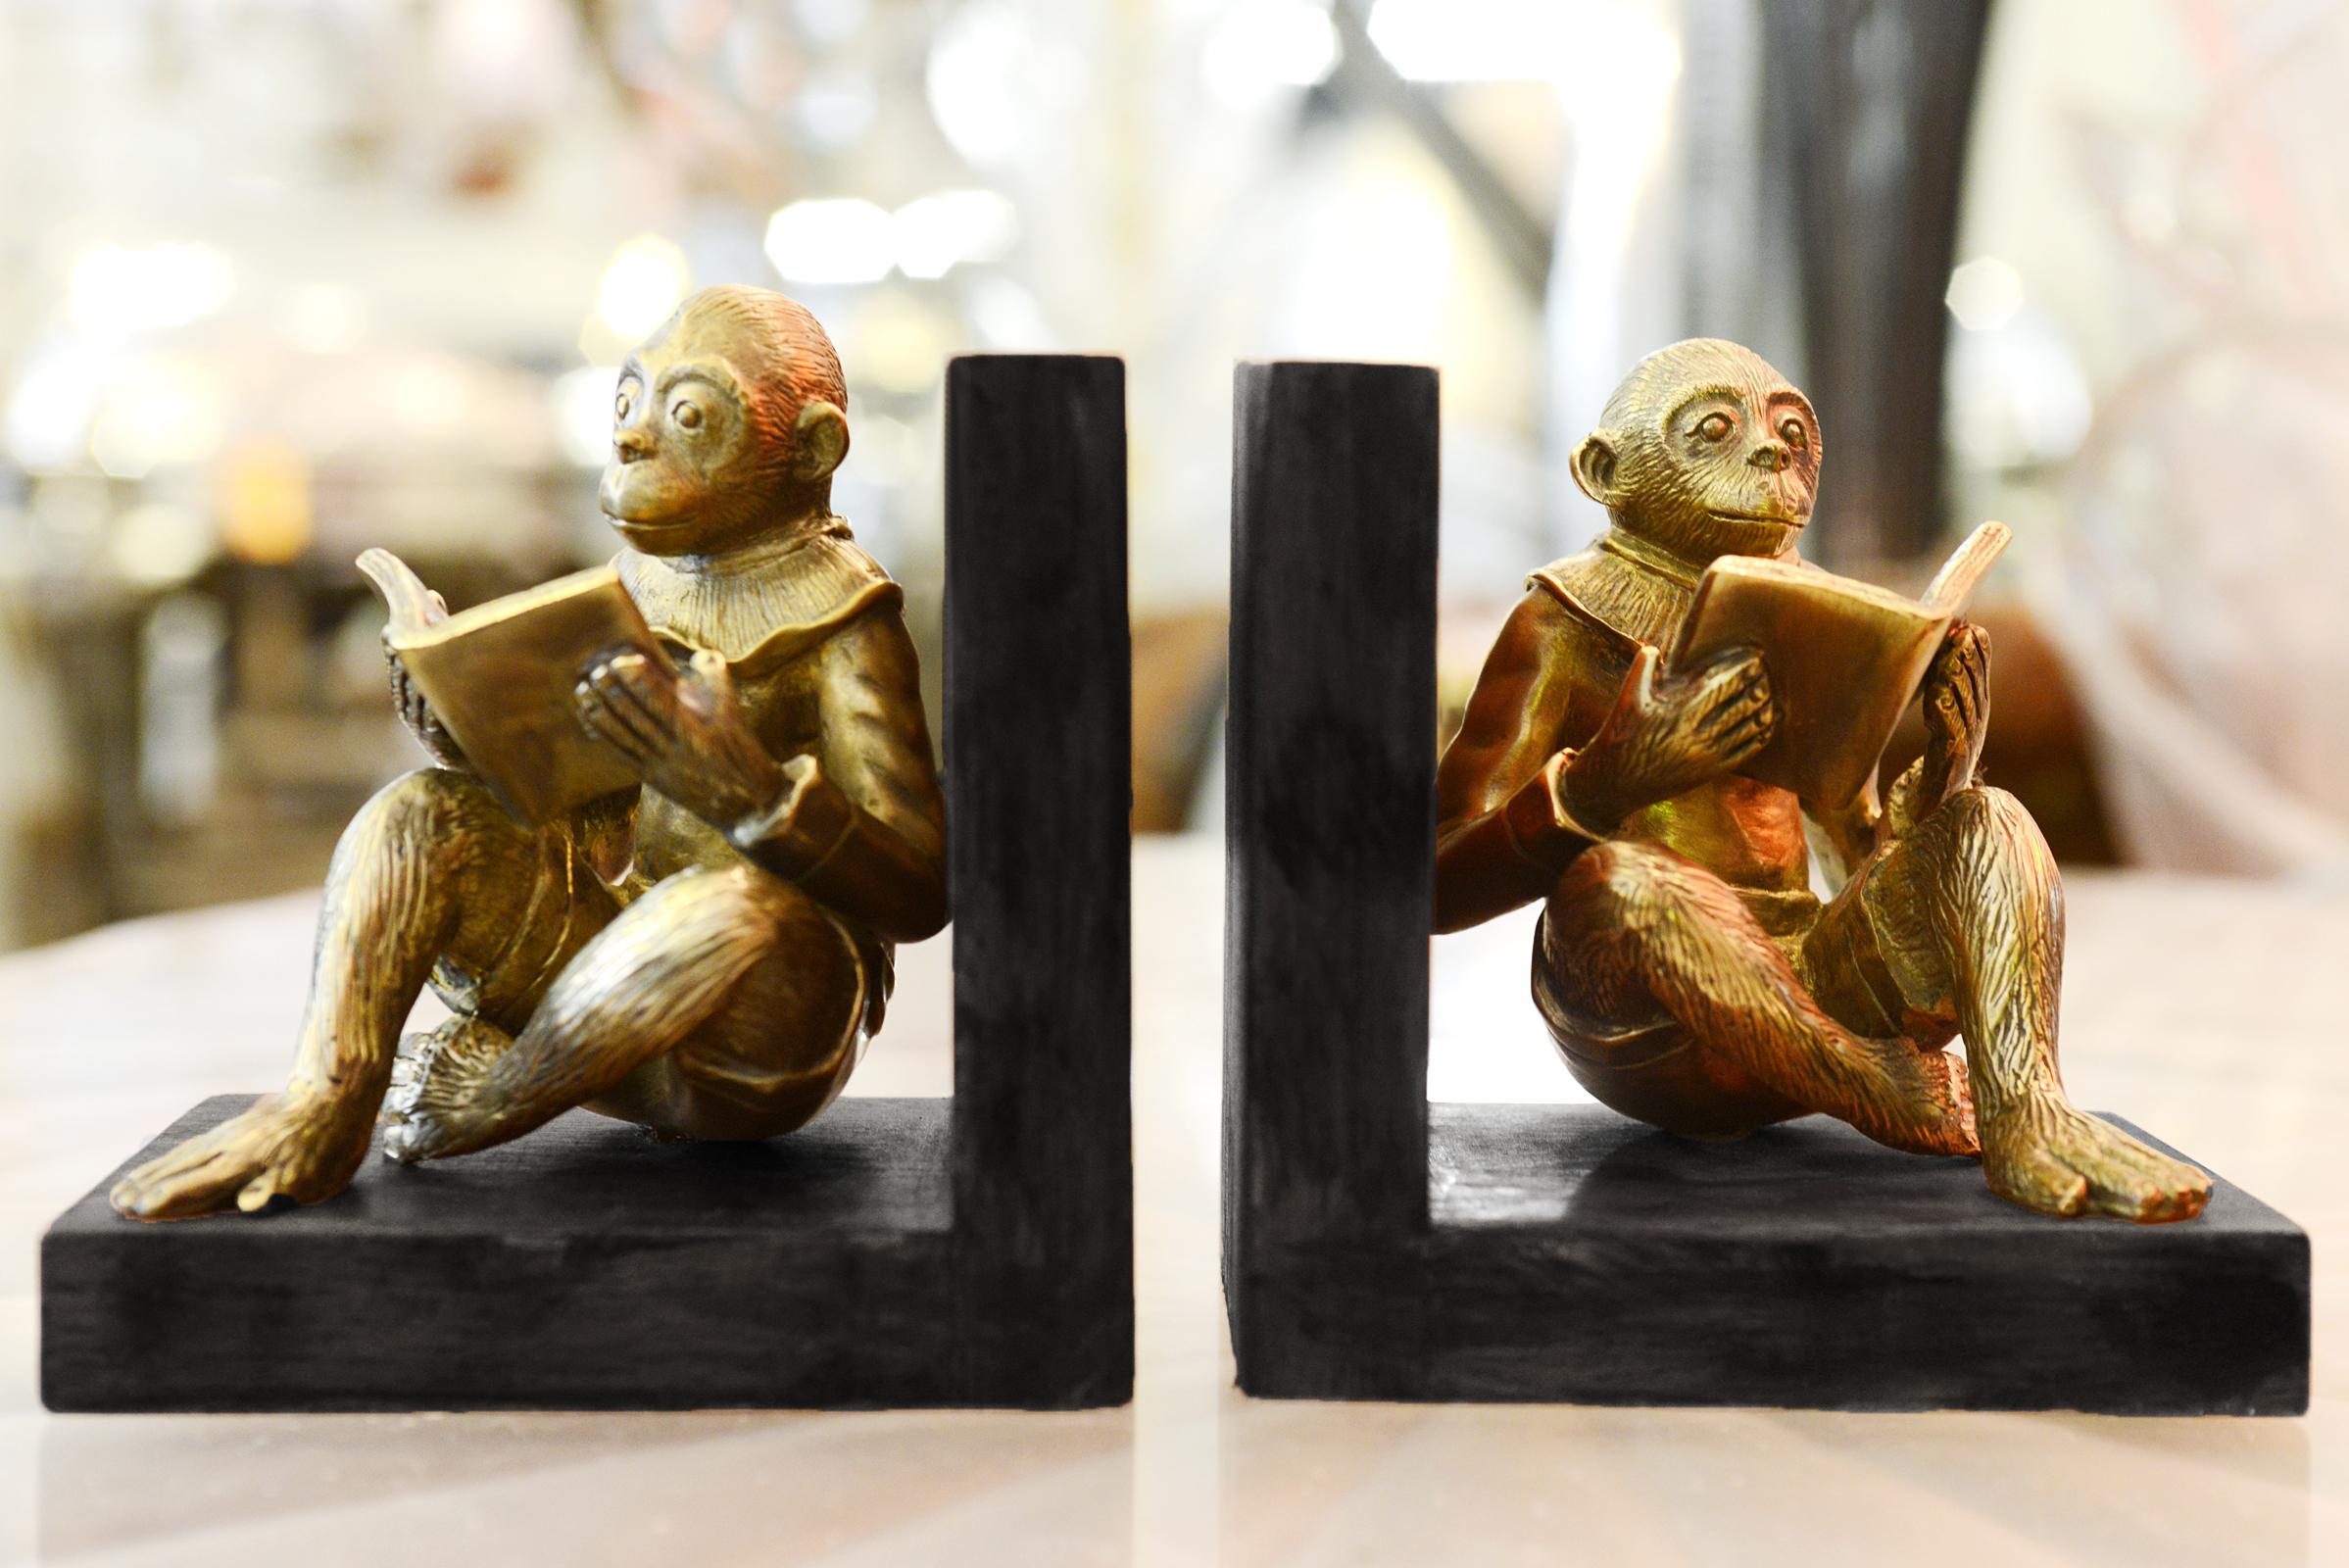 Bookends set of 2 Monkeys readers
in casted solid brass. On noble blackened wooden base.
Each piece is: L 12.7 x 10 x H 12.5cm.